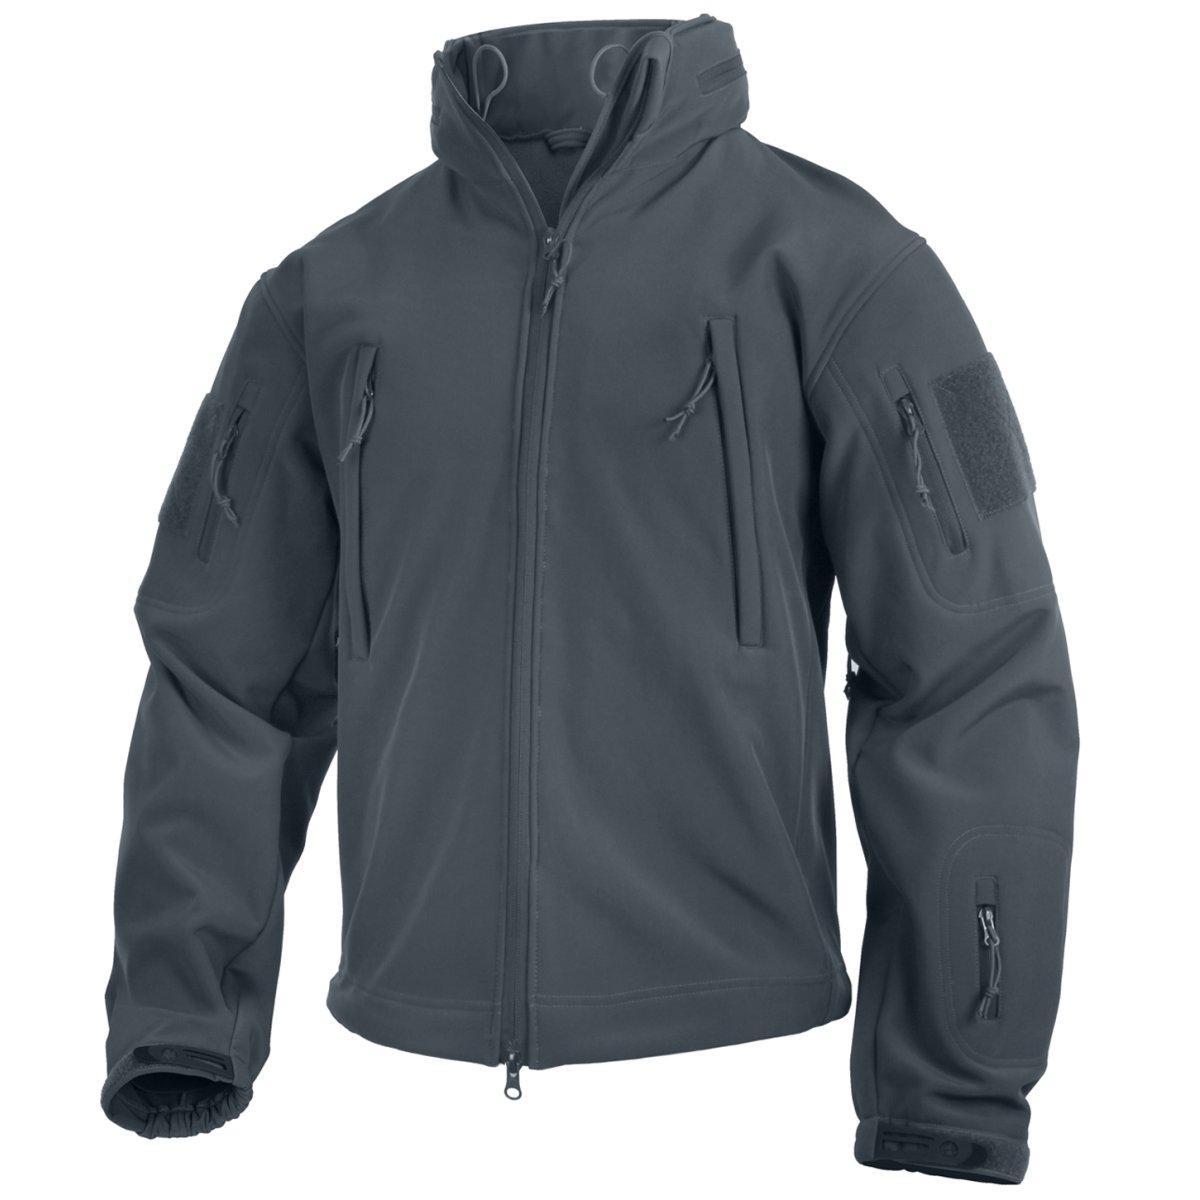 Rothco Special Ops Tactical Soft Shell Jacket